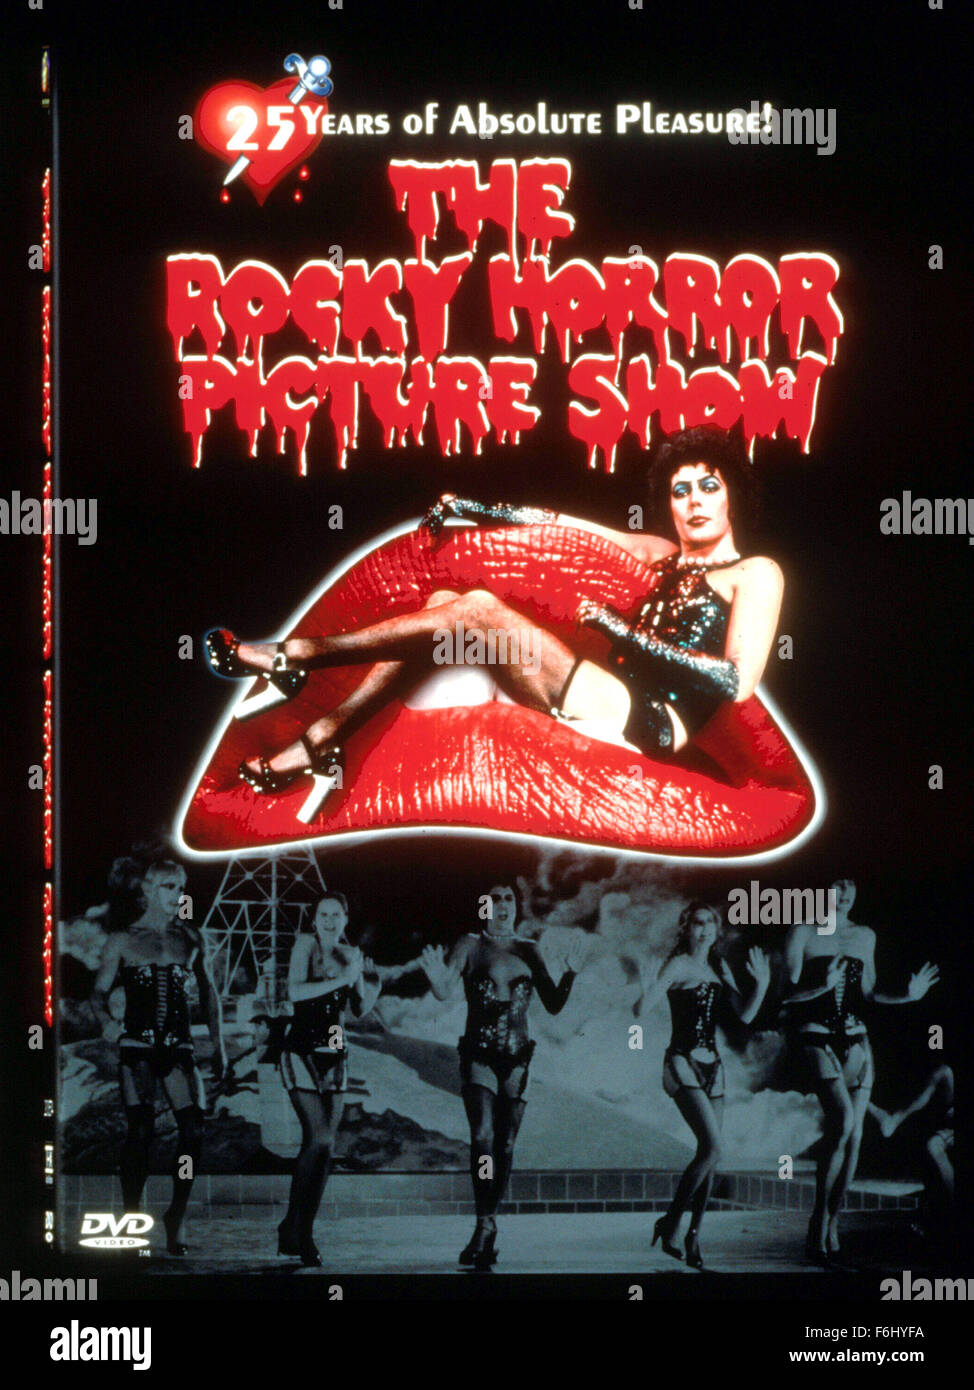 Jun 11, 2002; Hollywood, CA, USA; Actor TIM CURRY as Doctor Frank-N-Furter (A Scientist) and Actress SUSAN SARANDON as Janet Weiss (A Heroine) star in 'The Rocky Horror Picture Show' directed by JIM SHARMAN..  (Credit Image: ) Stock Photo